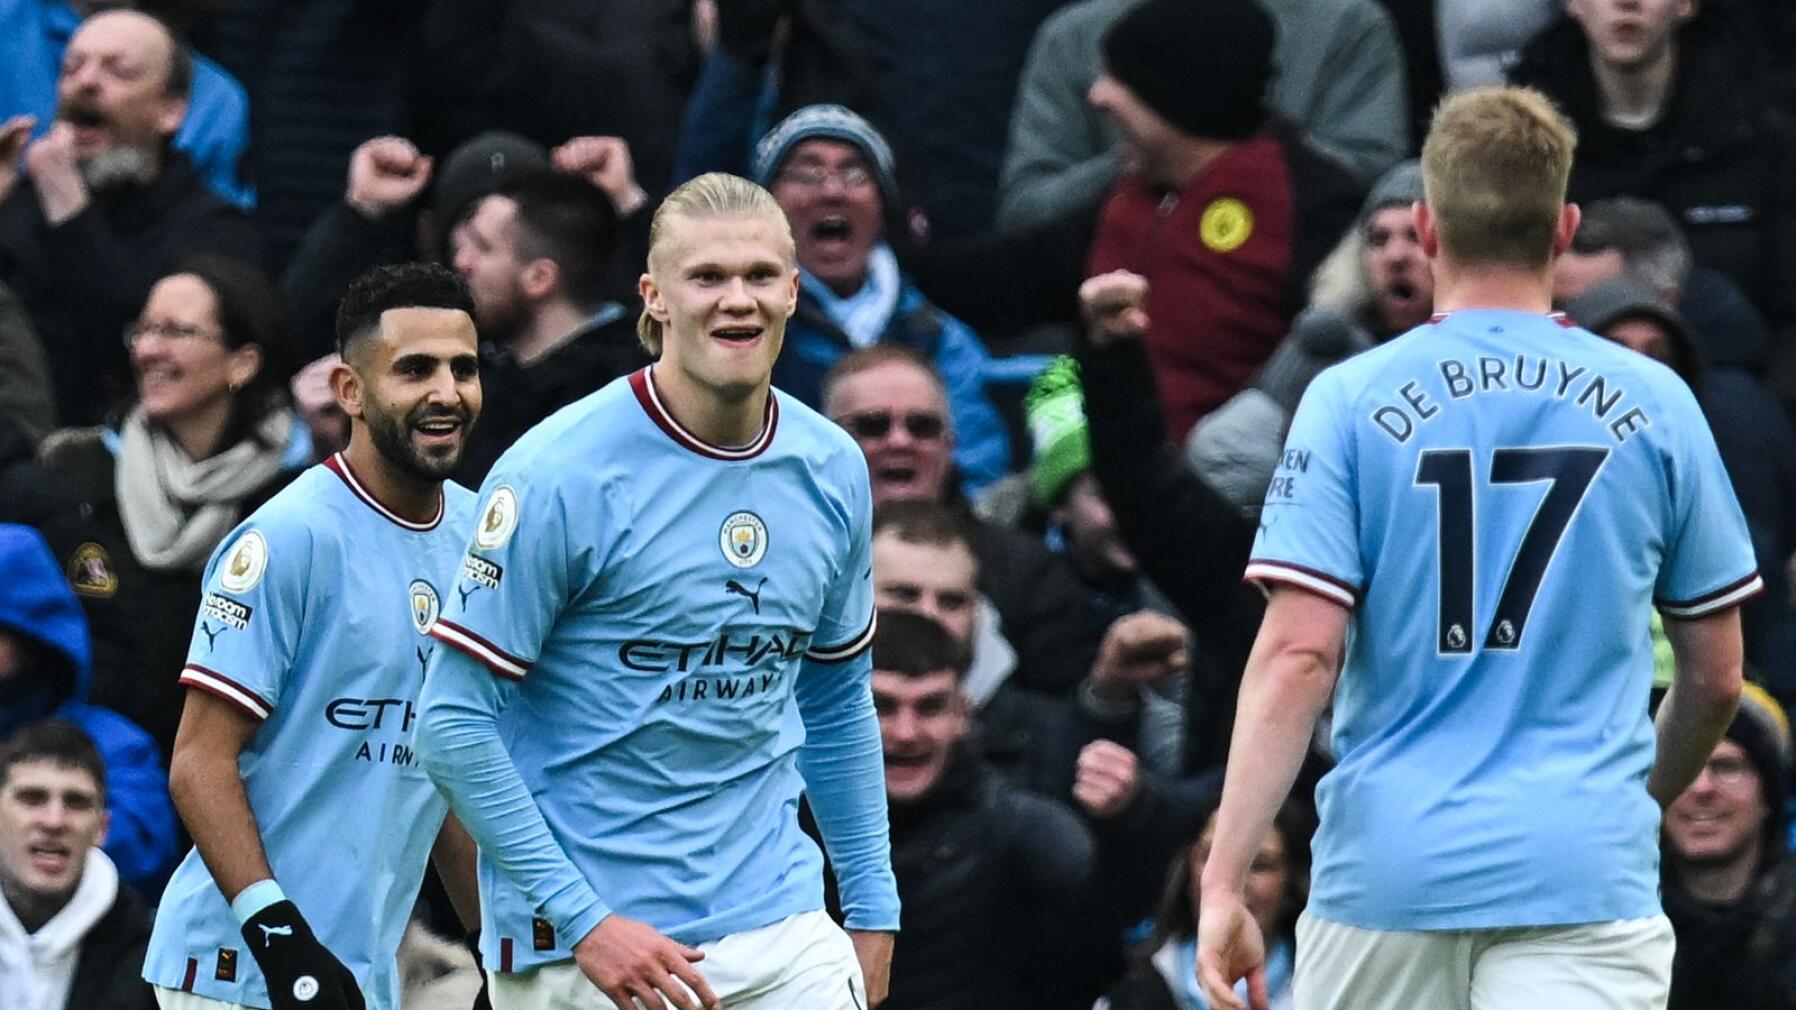 Manchester City's Erling Haaland celebrates with his teammates after after scoring during their Premier League game against Wolverhampton Wanderers at the Etihad Stadium in Manchester on Sunday